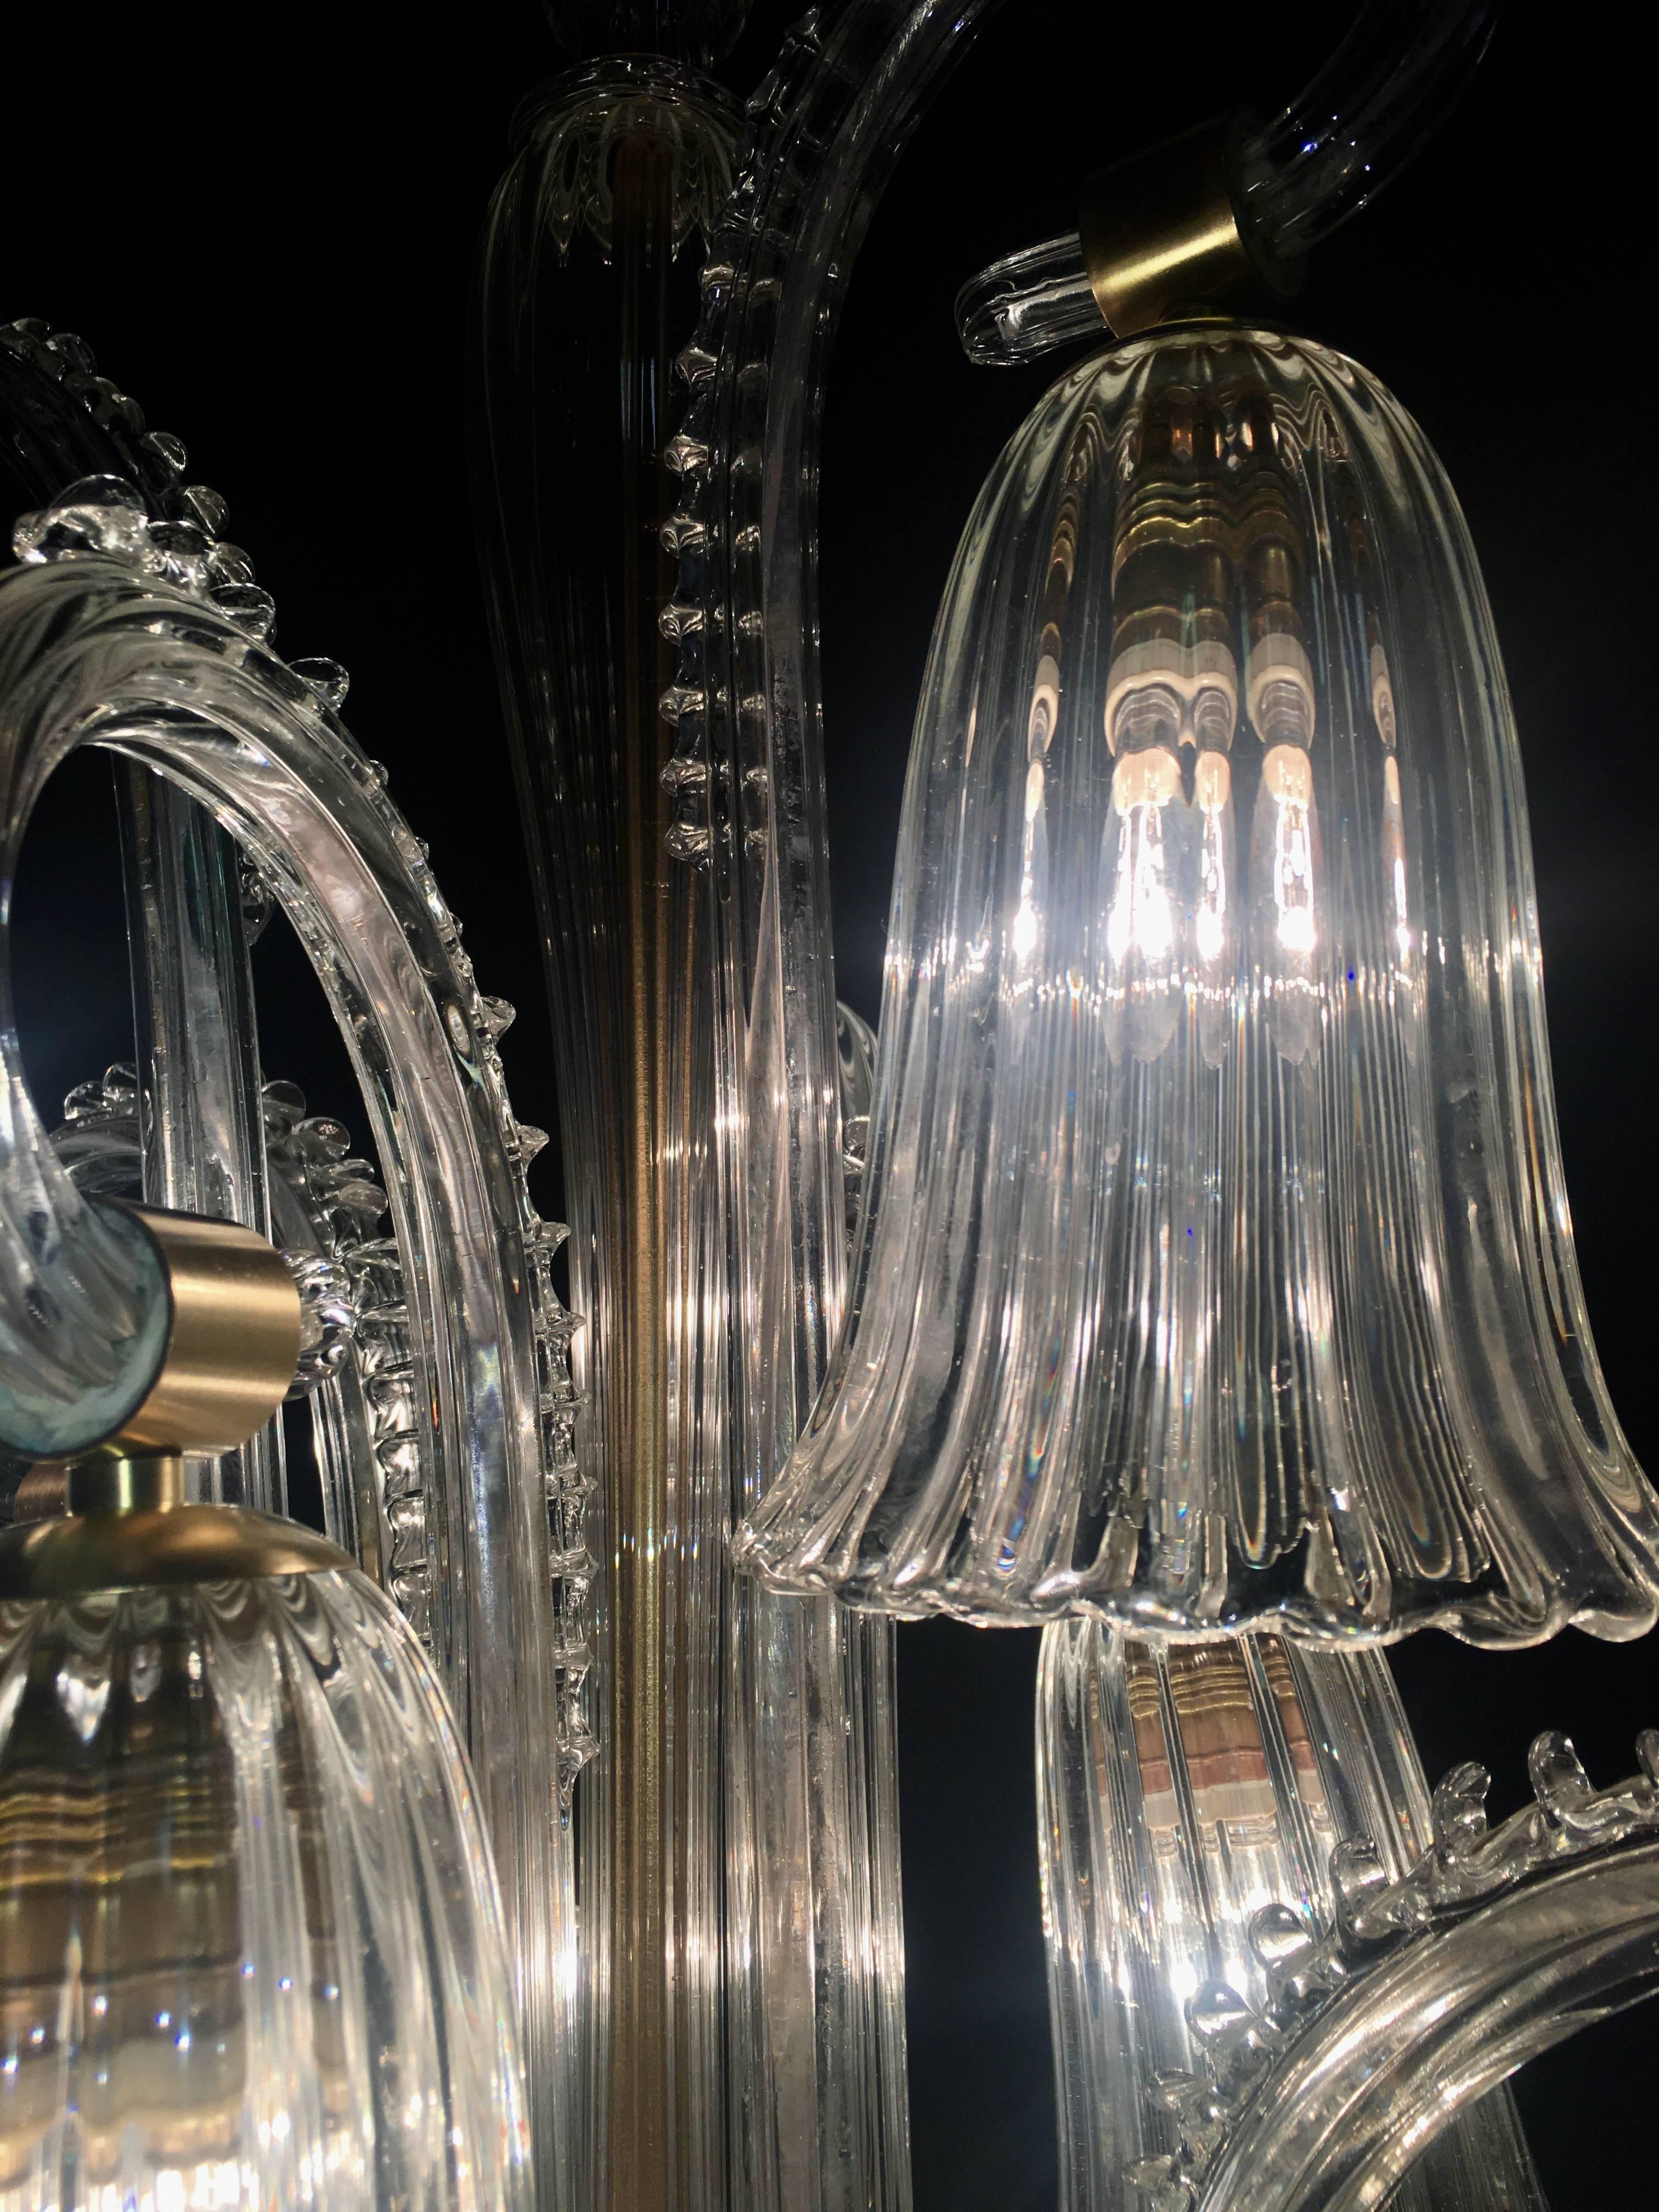 Charming Italian Chandelier by Ercole Barovier, Murano, 1940s For Sale 9